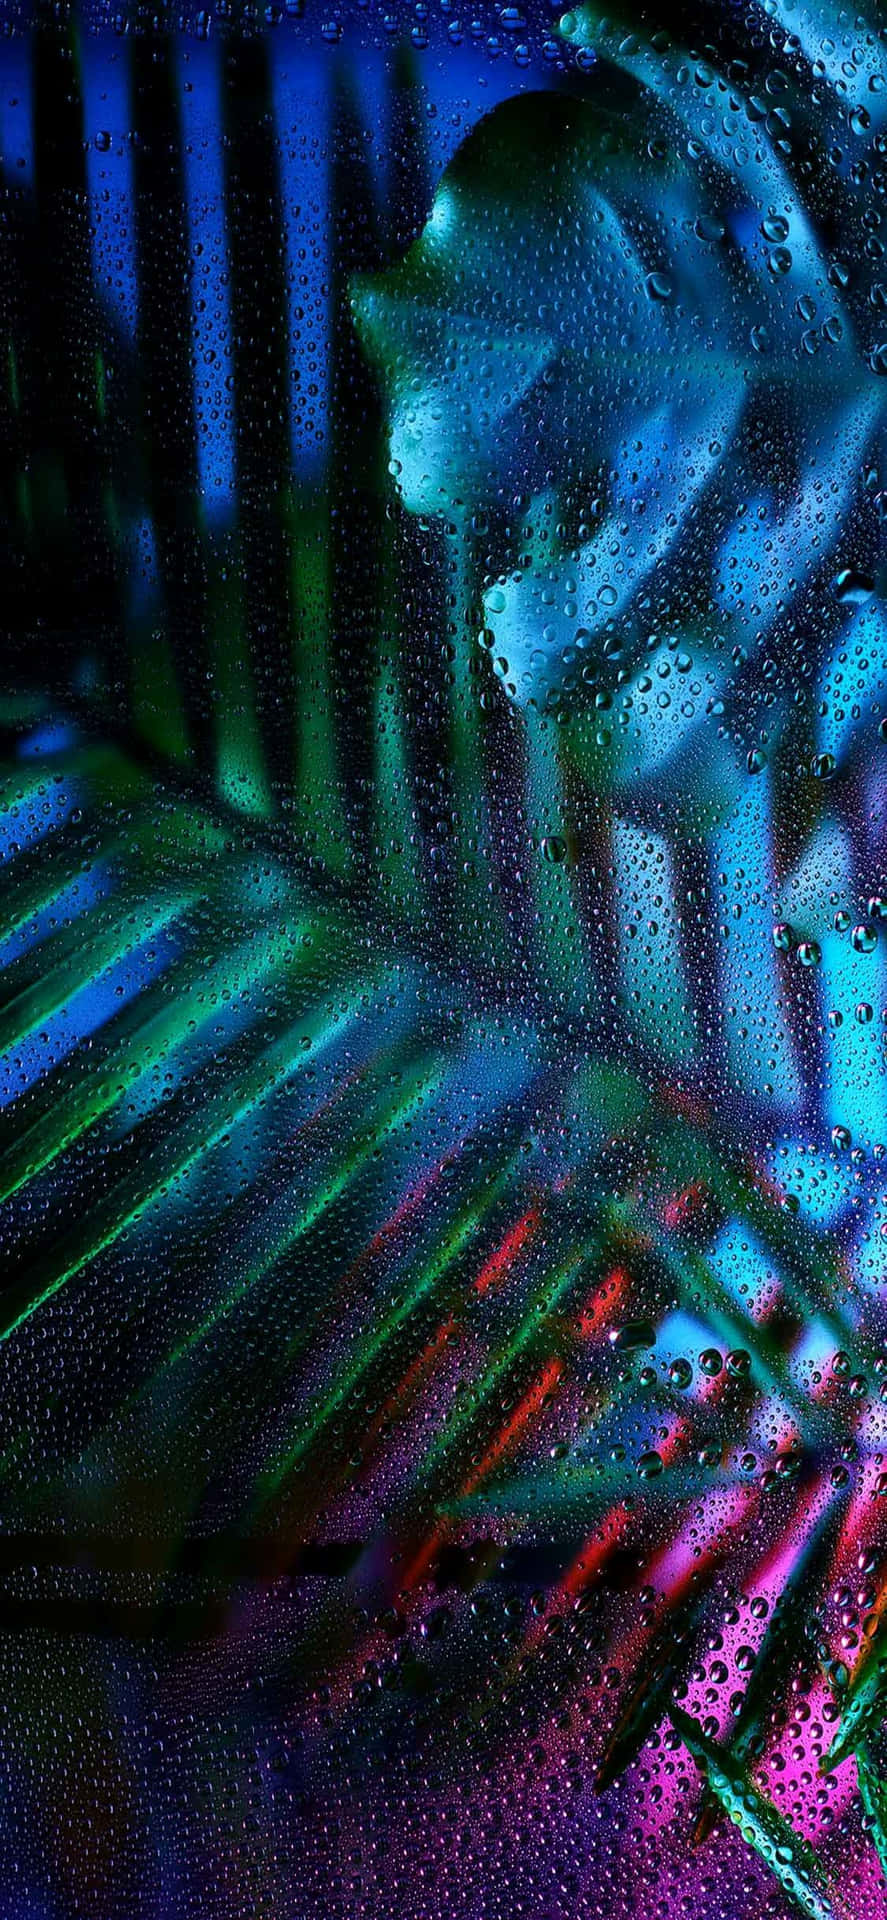 A Colorful Tropical Leaf With Water Droplets On It